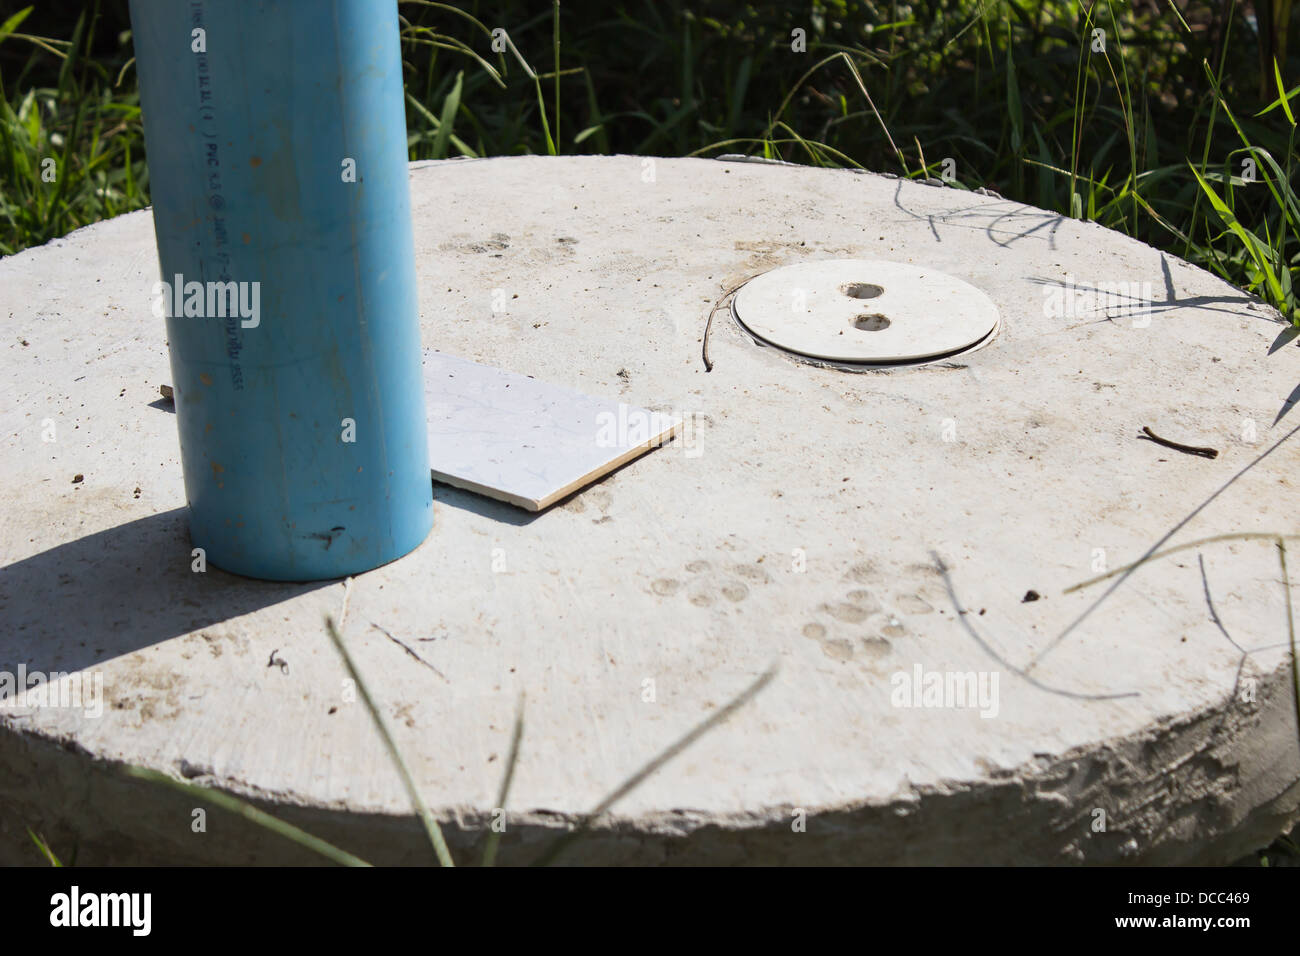 sewage system made of cement . systems treat wastewater in rural areas of Thailand. Stock Photo